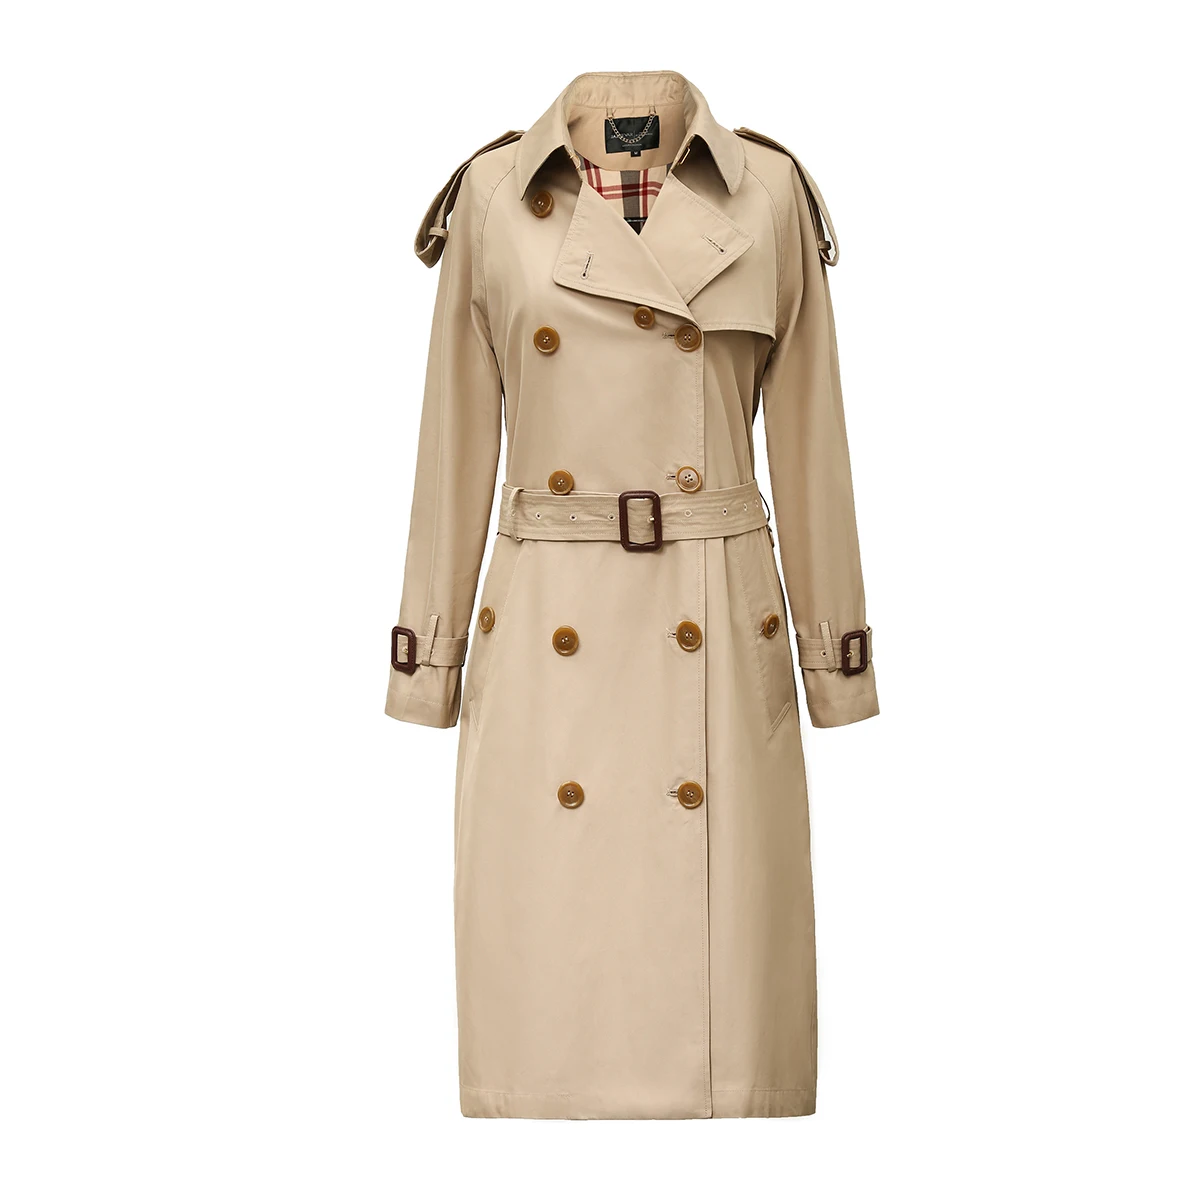 New High Fashion Women's Waterproof Cotton Long Double-breasted The Westminster Heritage Trench Coat [fila]seersucker heritage women pajamas